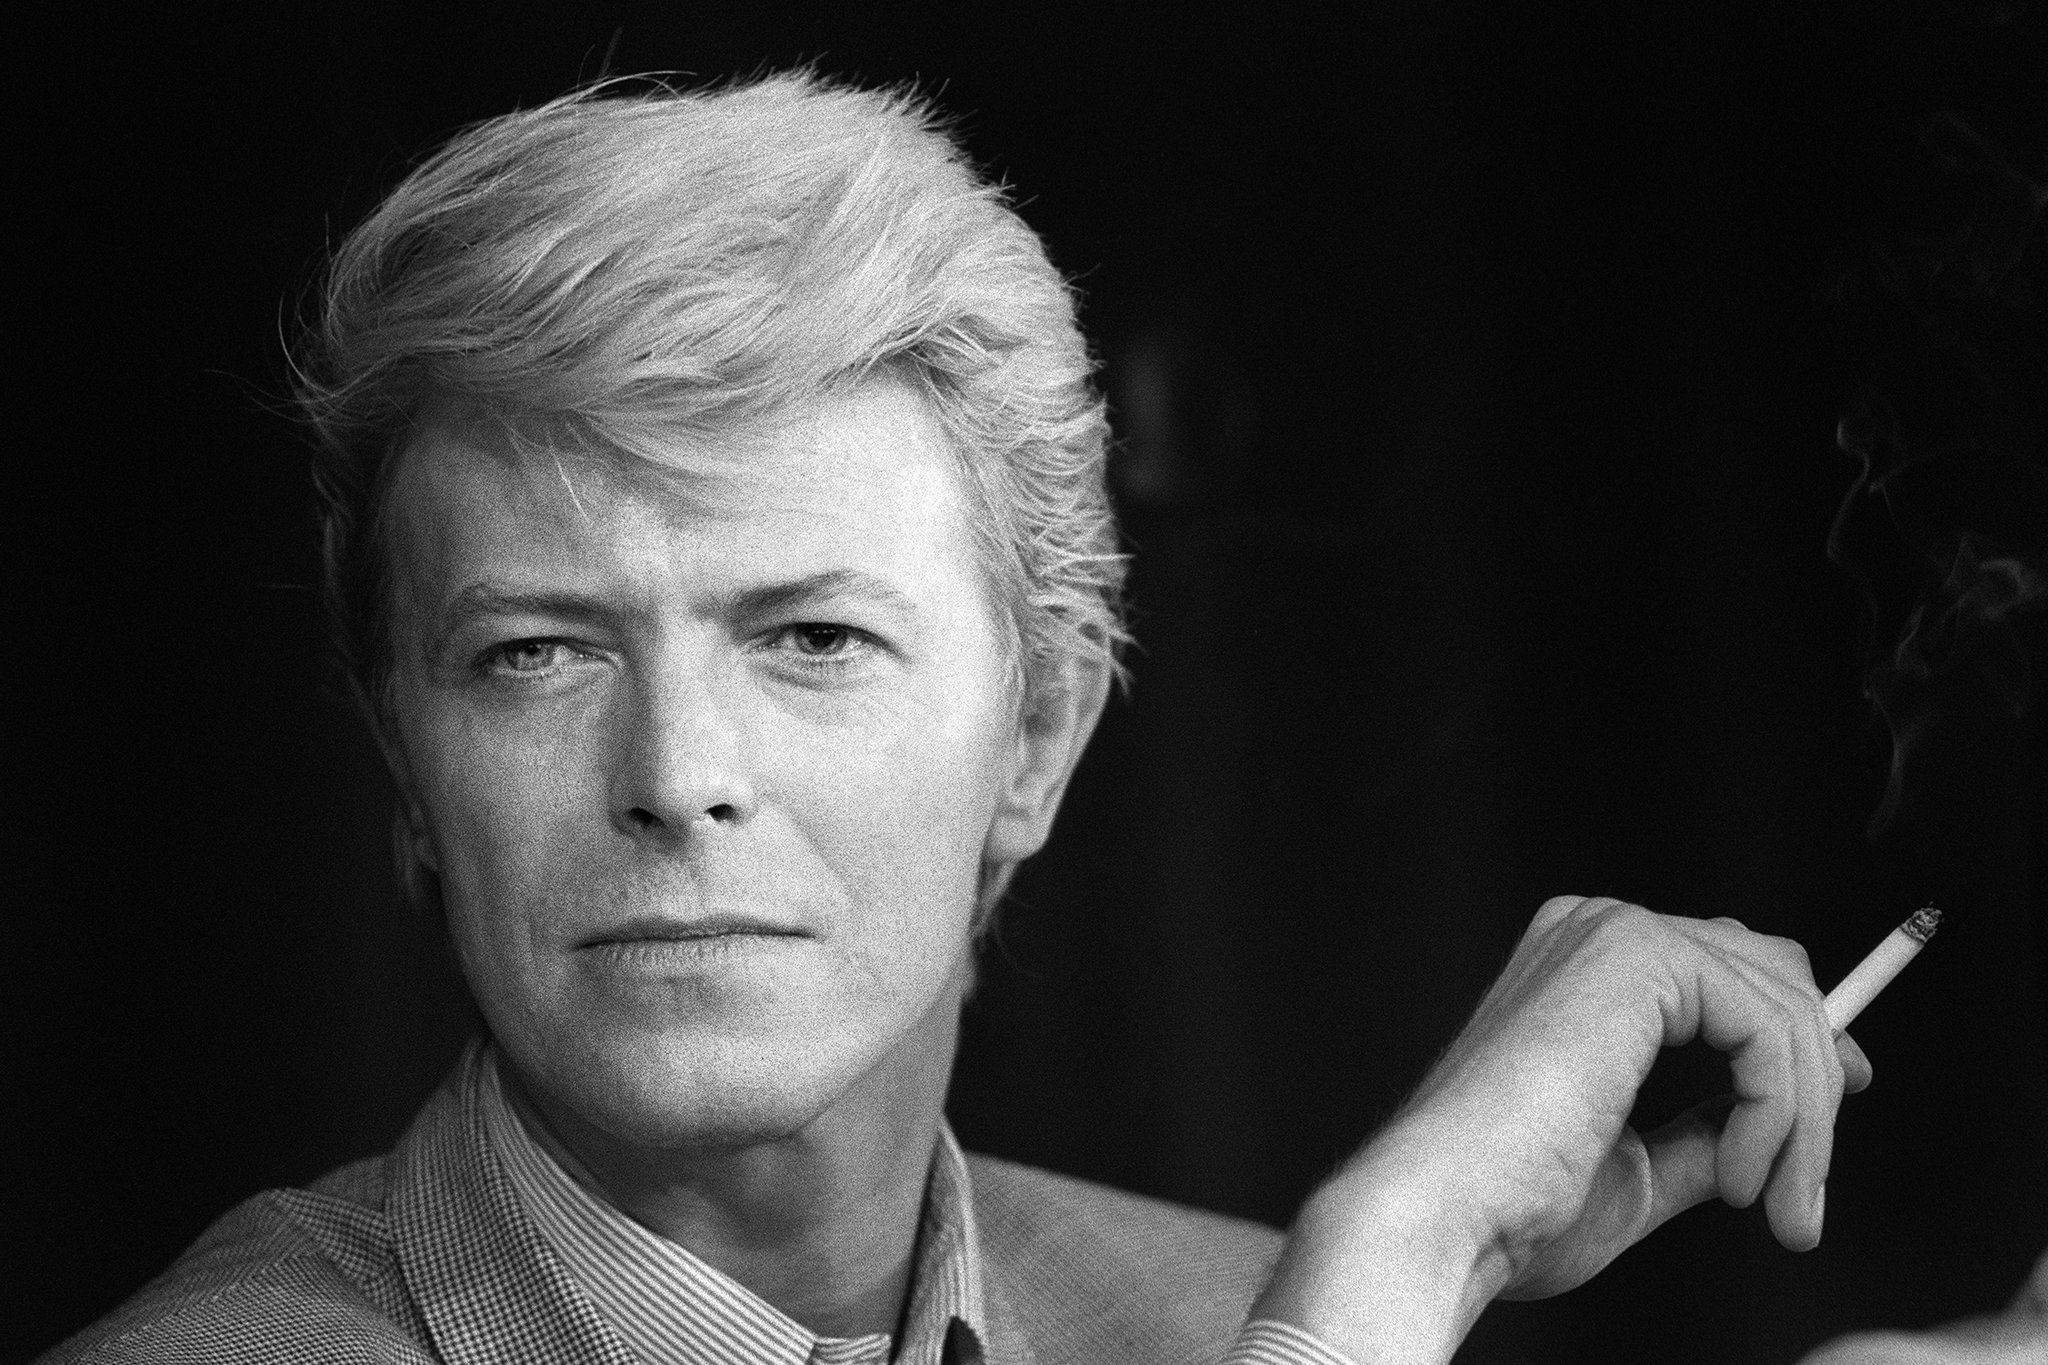 David Bowie Dies at 69; Star Transcended Music, Art and Fashion - The New York Times